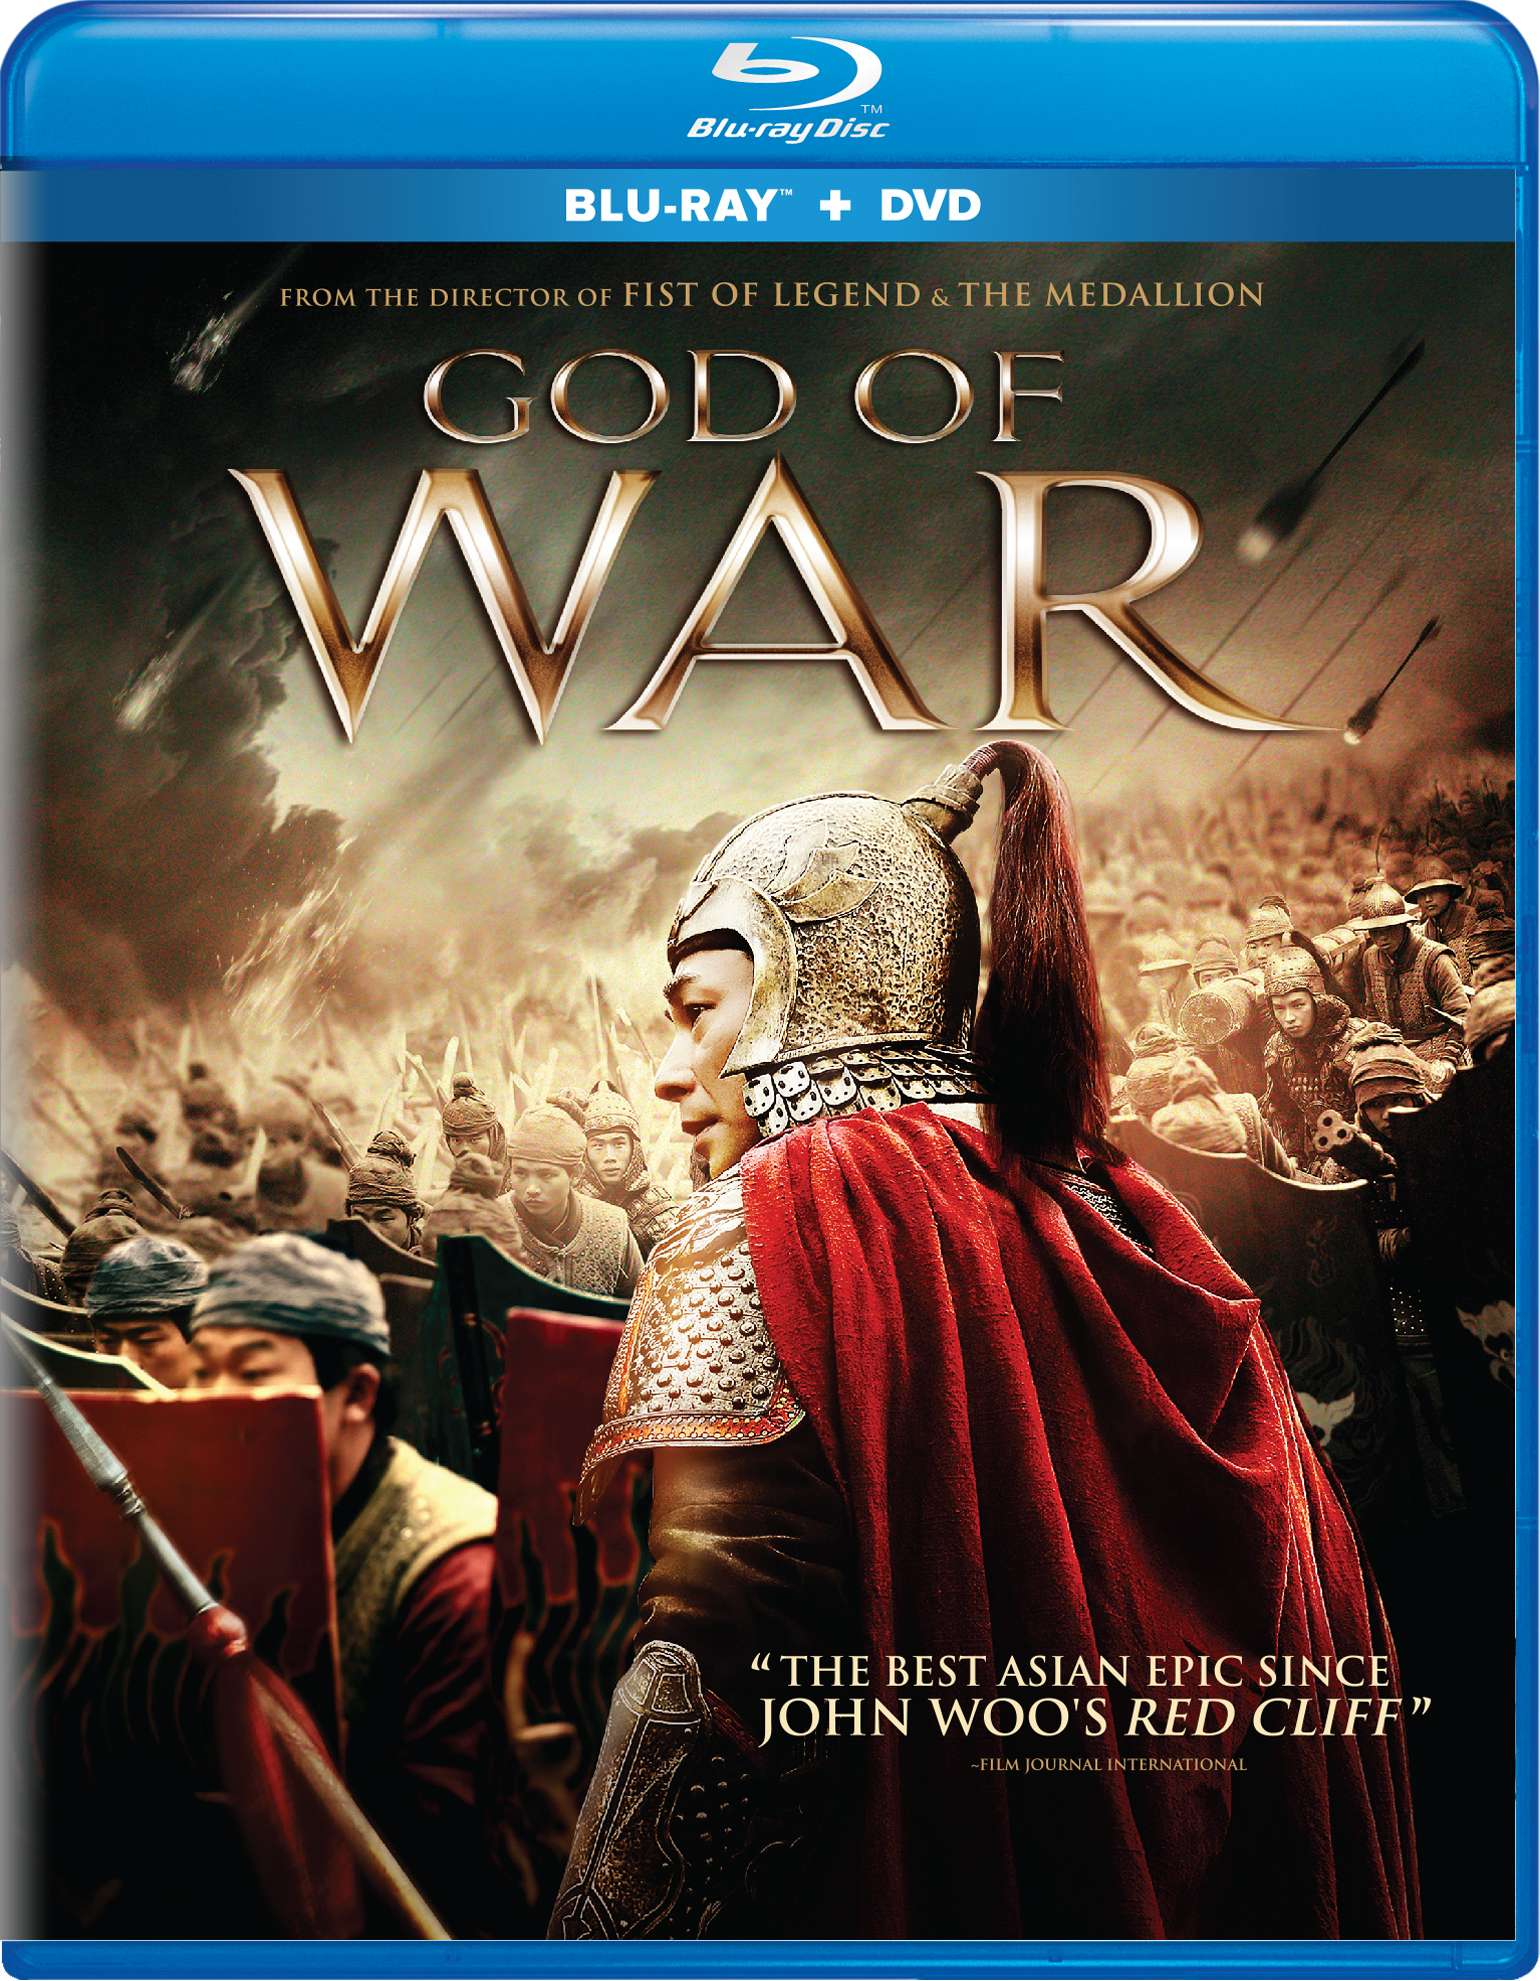 God Of War (with DVD) - Blu-ray [ 2017 ]  - Foreign Movies On Blu-ray - Movies On GRUV